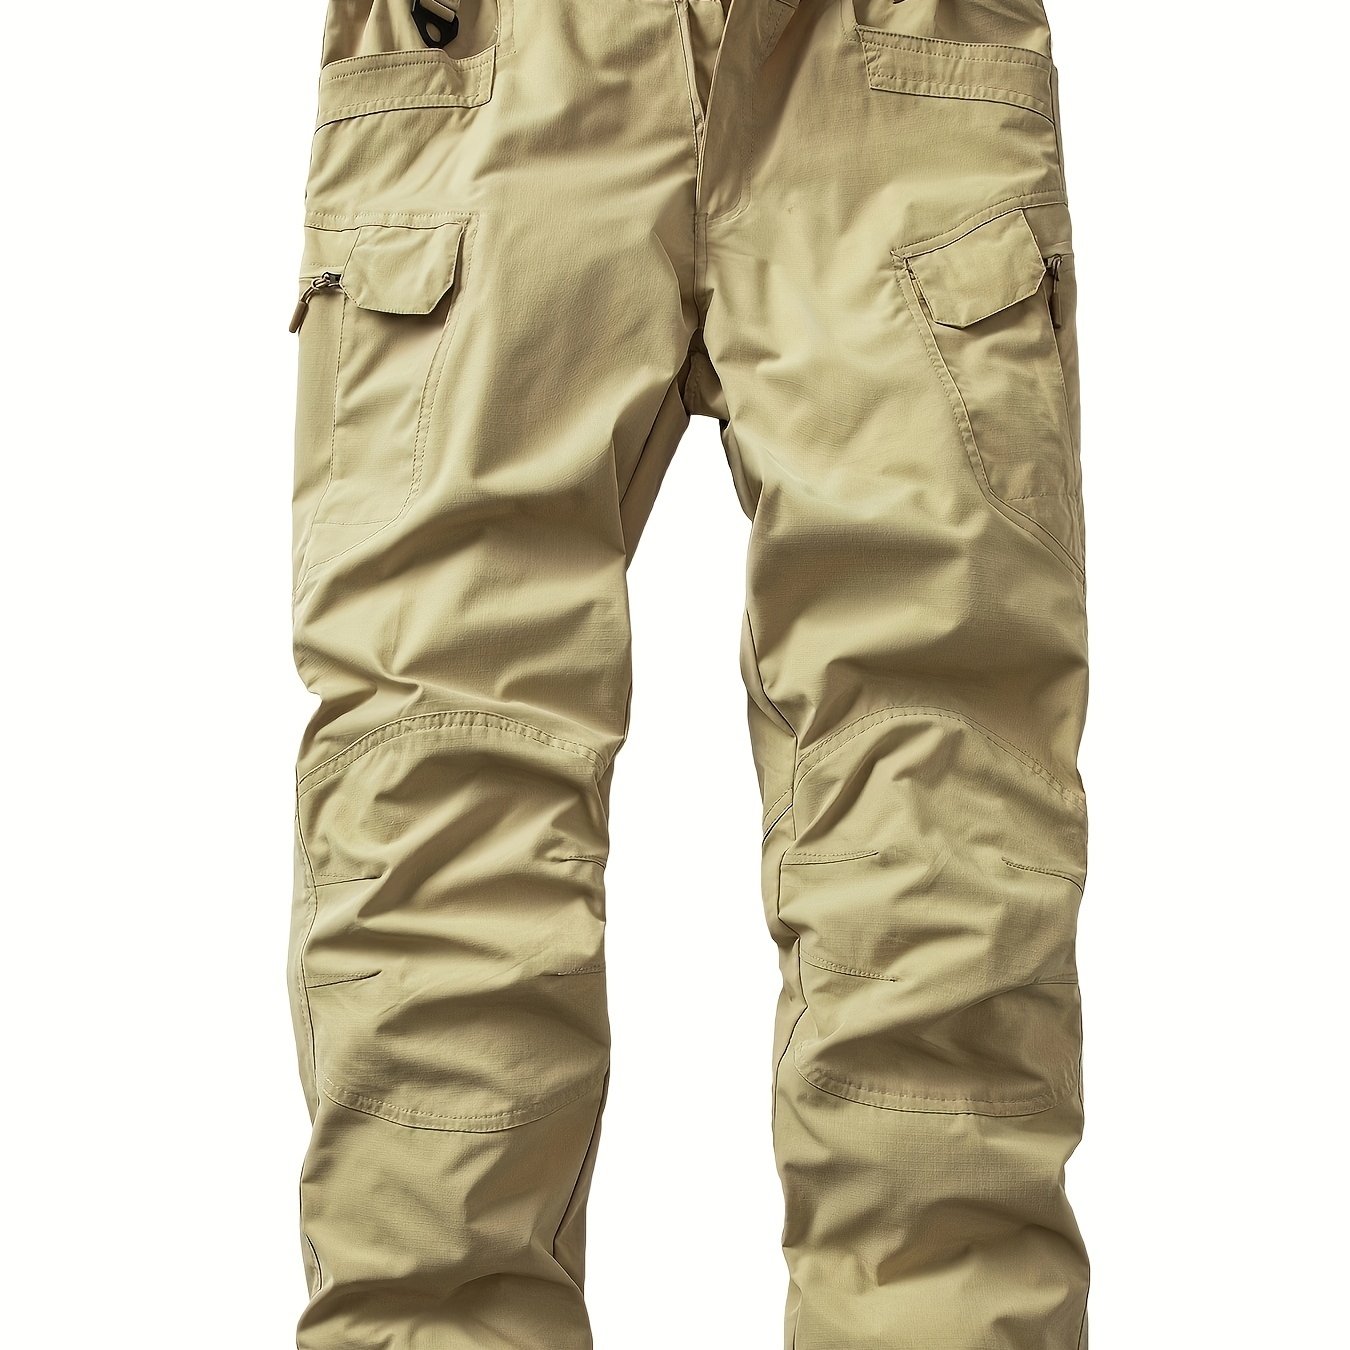 Solid Men's Straight Leg Cargo Pants, Loose Casual Outdoor Pants, Men's  Work Pants For Hiking Fishing Angling